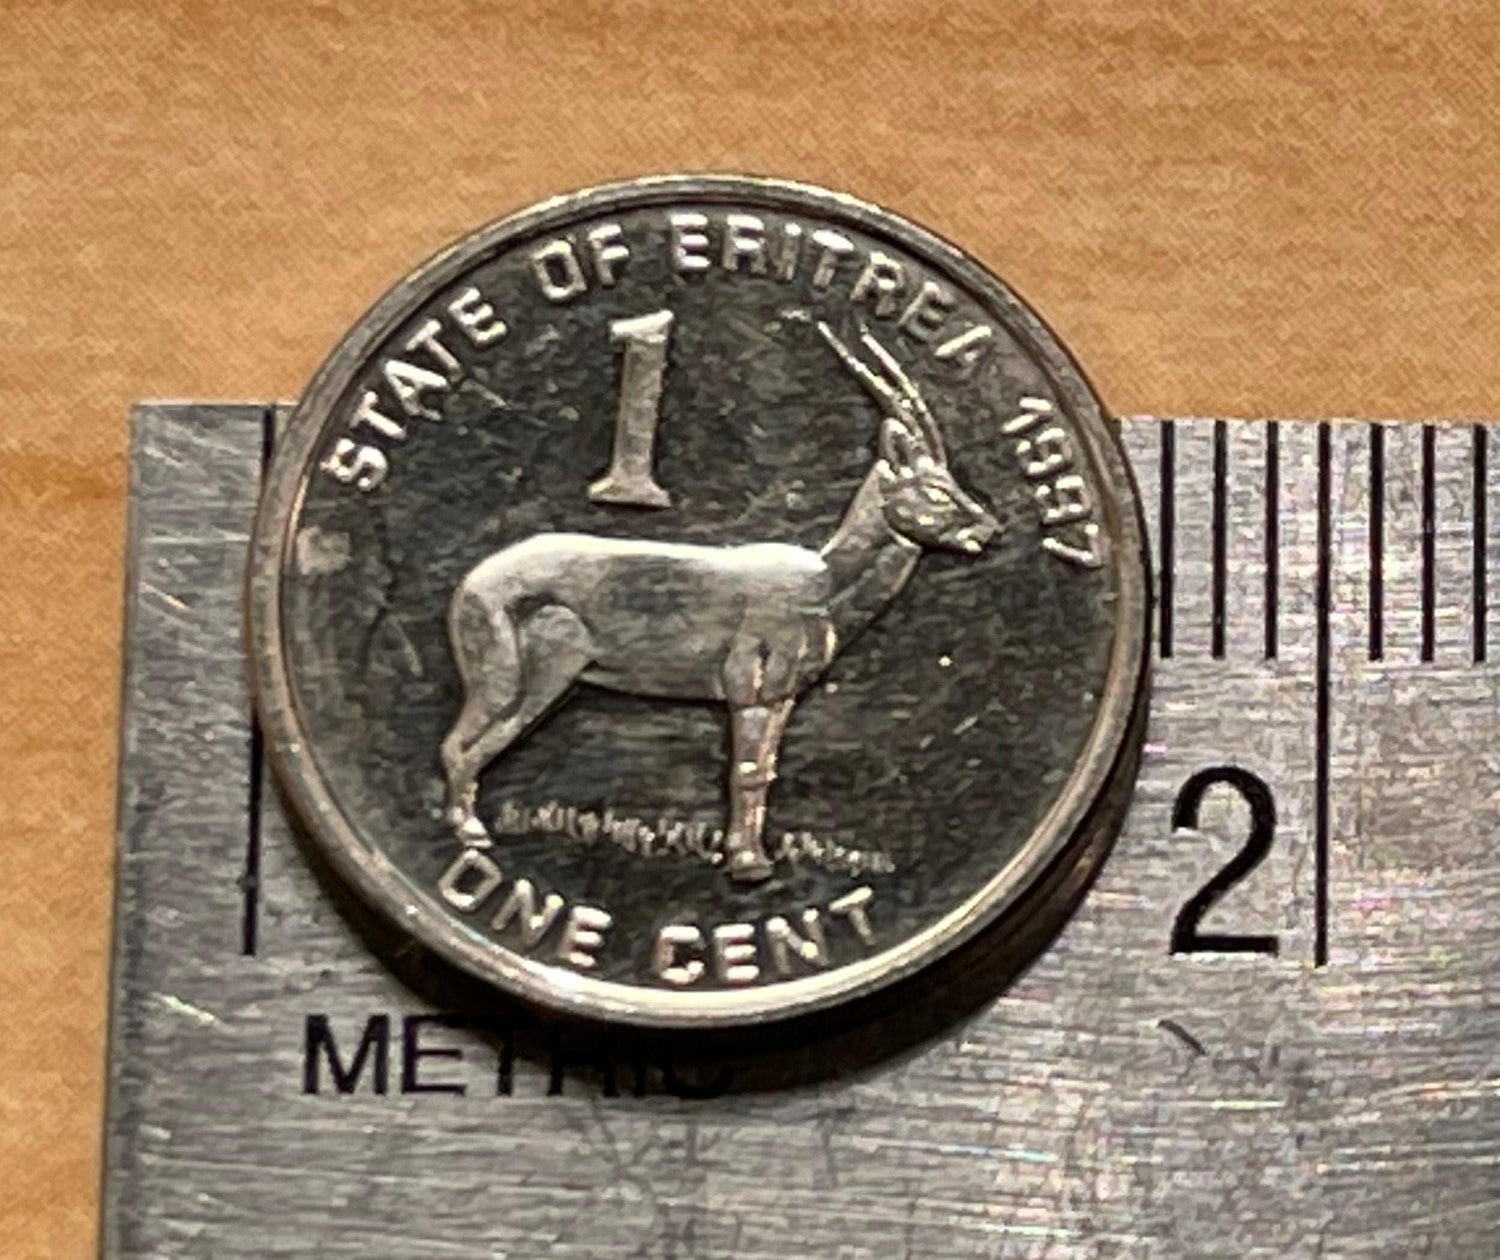 Liberty Equality Justice & Gazelle Penny Eritrea Authentic Coin Money for Jewelry and Craft Making